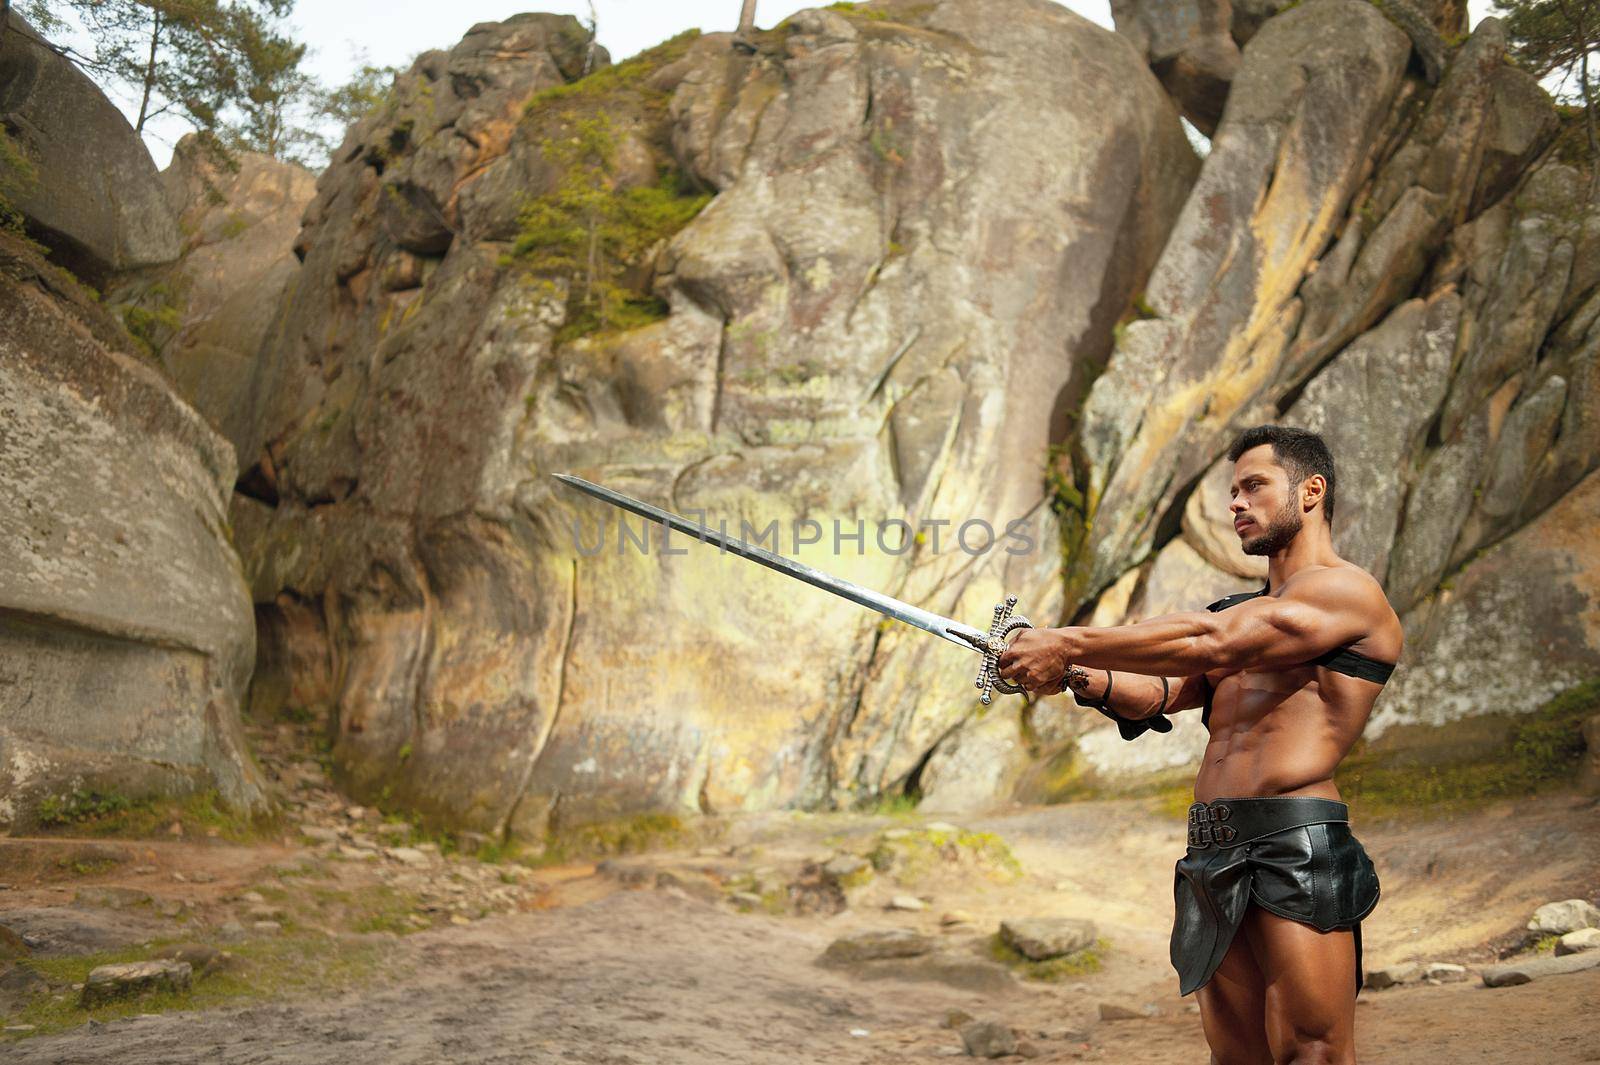 Practicing his skills. Horizontal shot of a masculine Spartan warrior practicing with a sword near the rocks